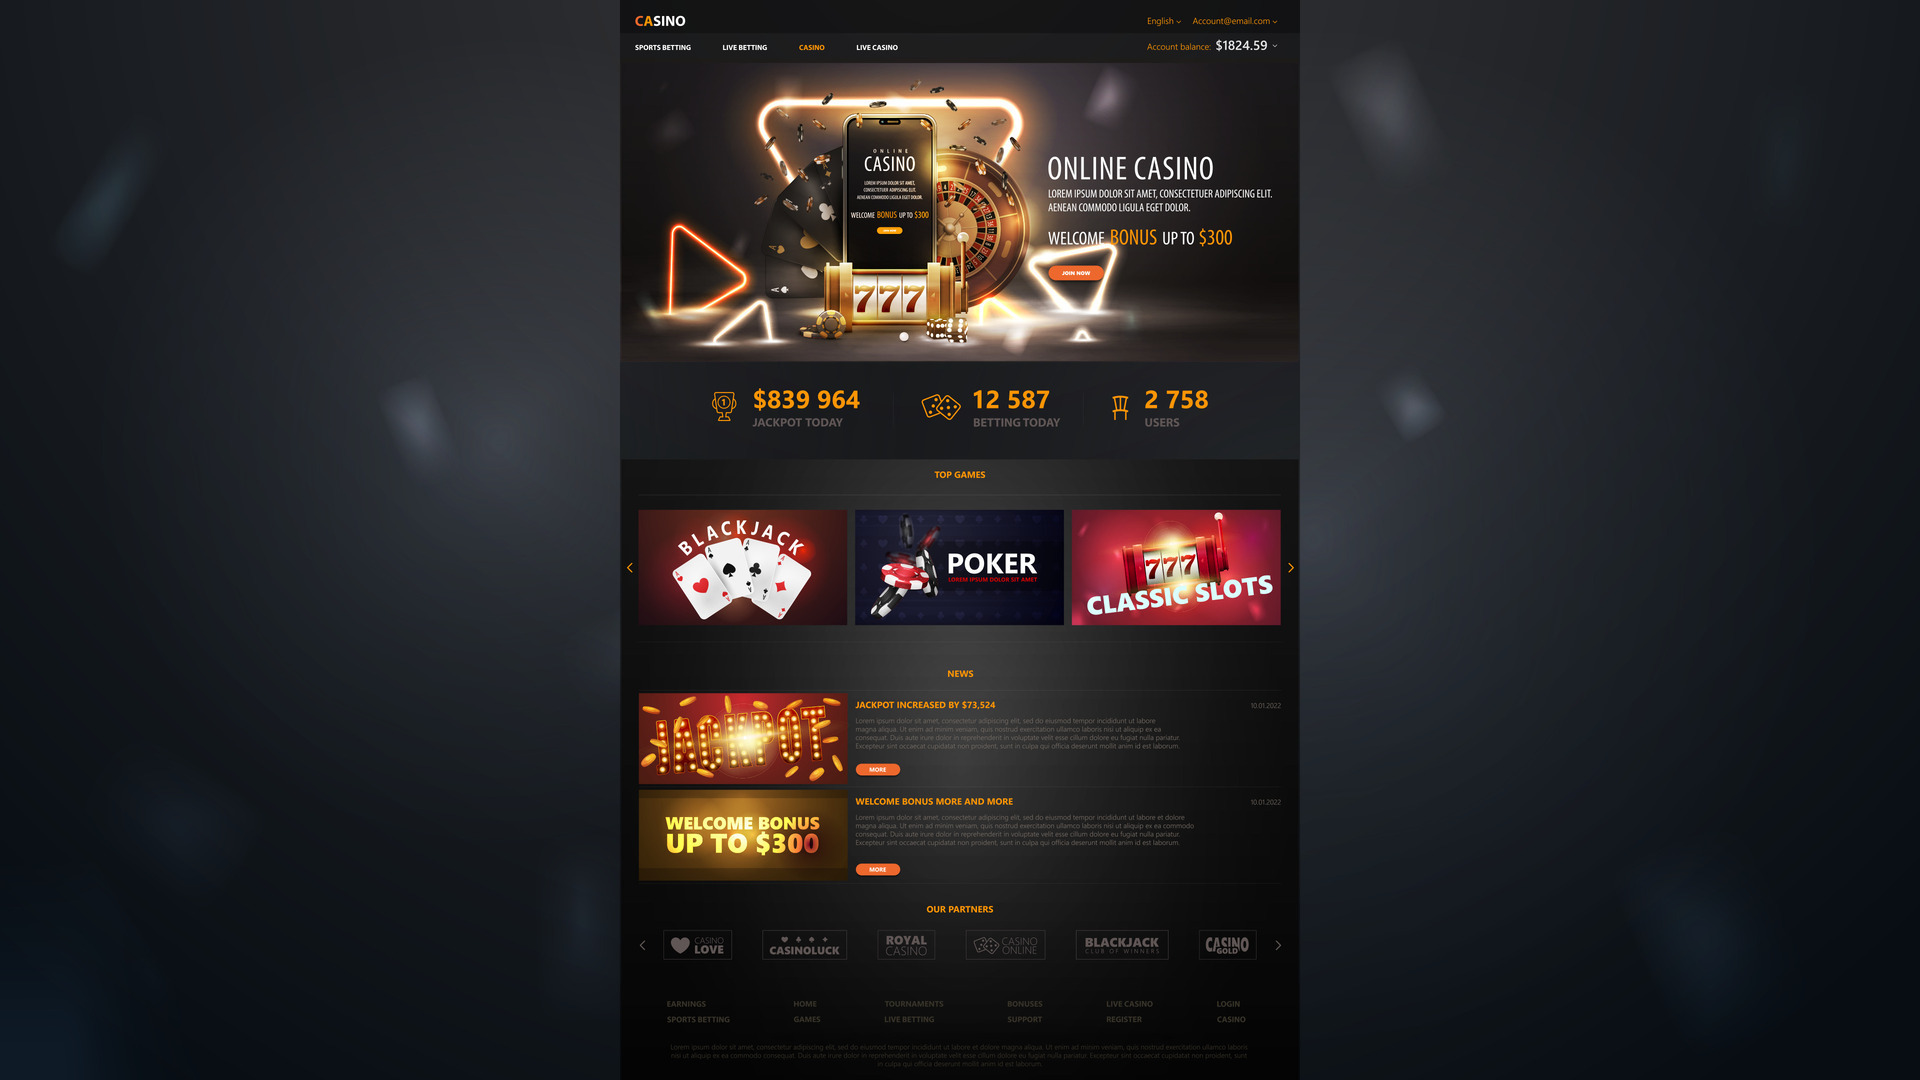 How To Spread The Word About Your Grandpashabet Casino: Winning Opportunities Anywhere with the Mobile App